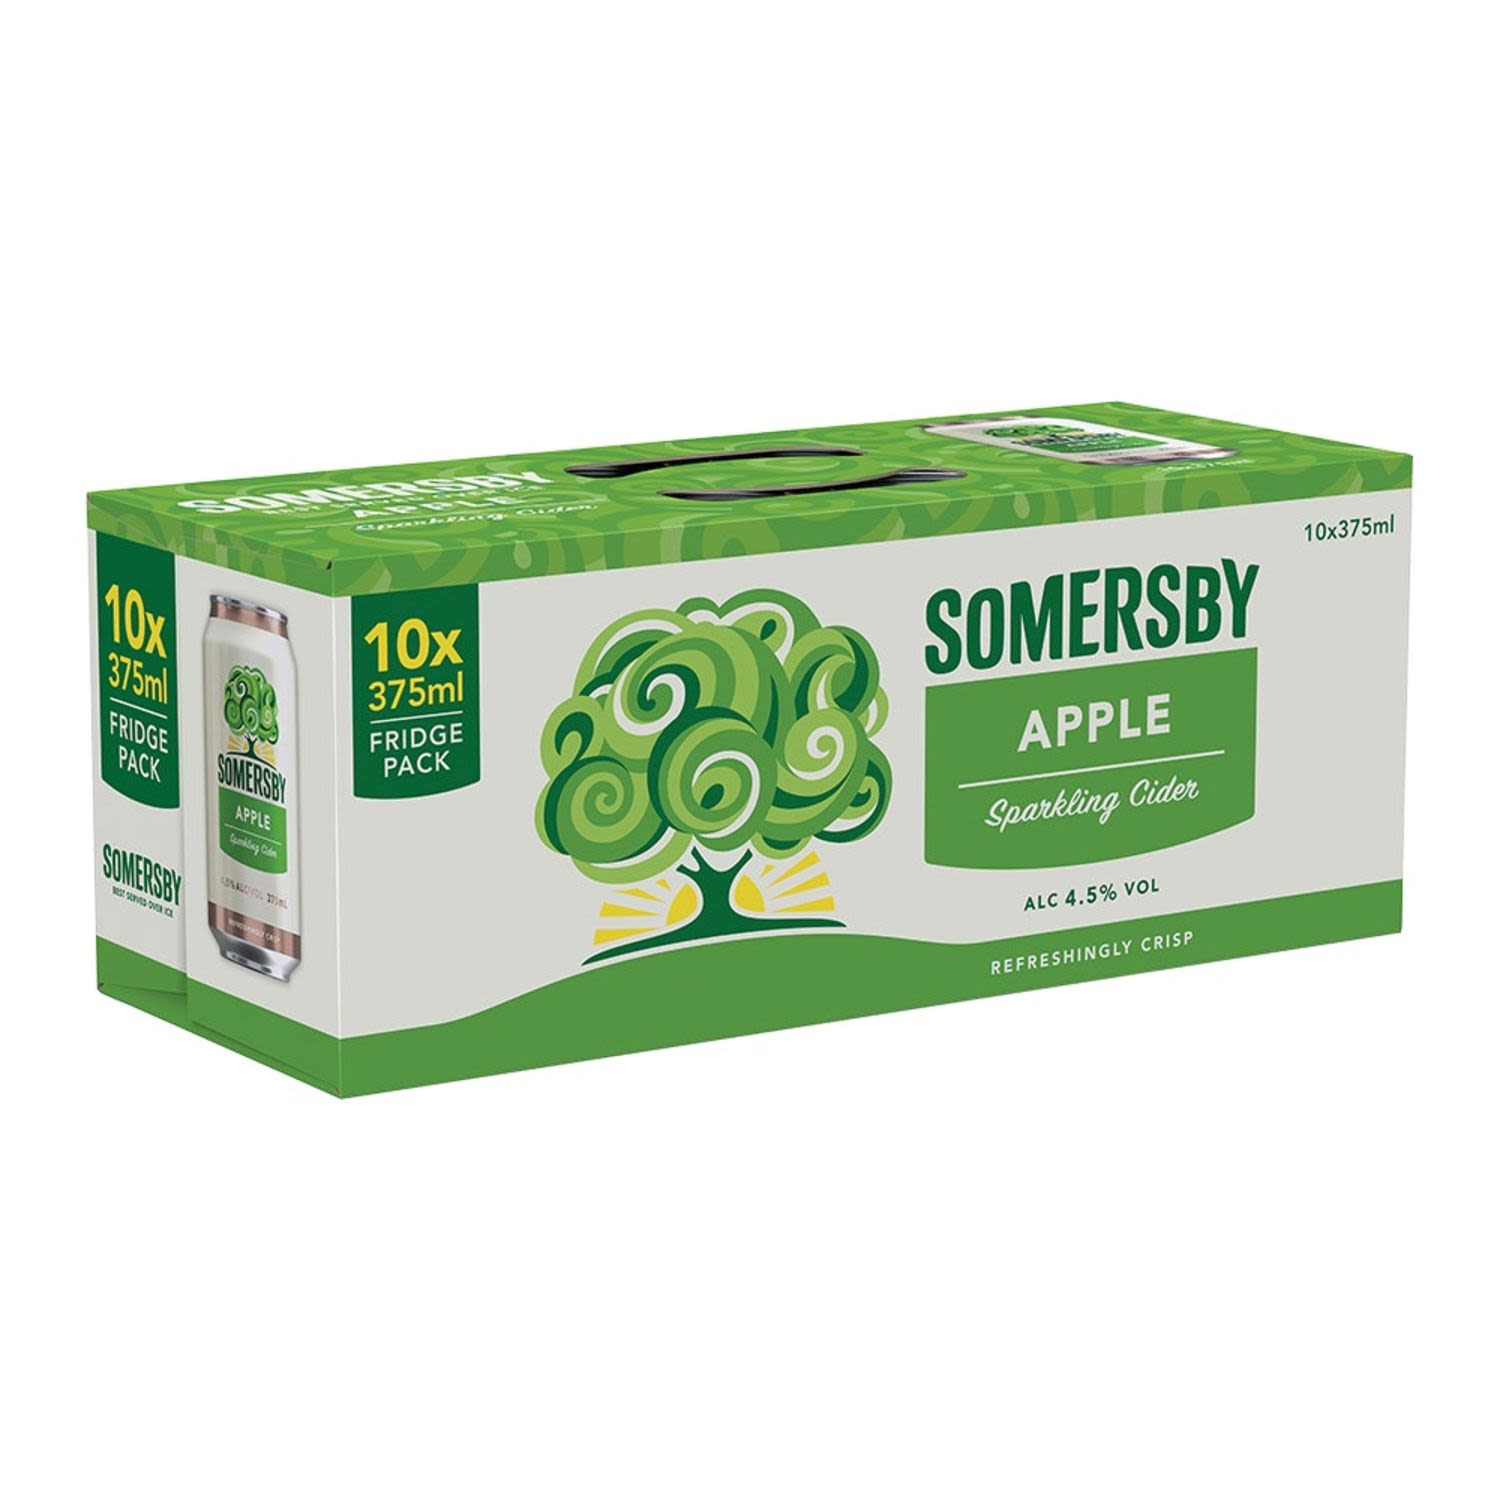 Somersby Apple Cider is an invigorating and refreshing cider made from quality fermented apple juice and natural apple flavouring. There are no artificial sweeteners, flavours or colourings used in the making of this premium cider whose unique taste makes it a tasty and natural choice for the relaxed moments with your friends.<br /> <br />Alcohol Volume: 4.50%<br /><br />Pack Format: 10 Pack<br /><br />Standard Drinks: 1.3</br /><br />Pack Type: Can<br /><br />Country of Origin: Australia<br />